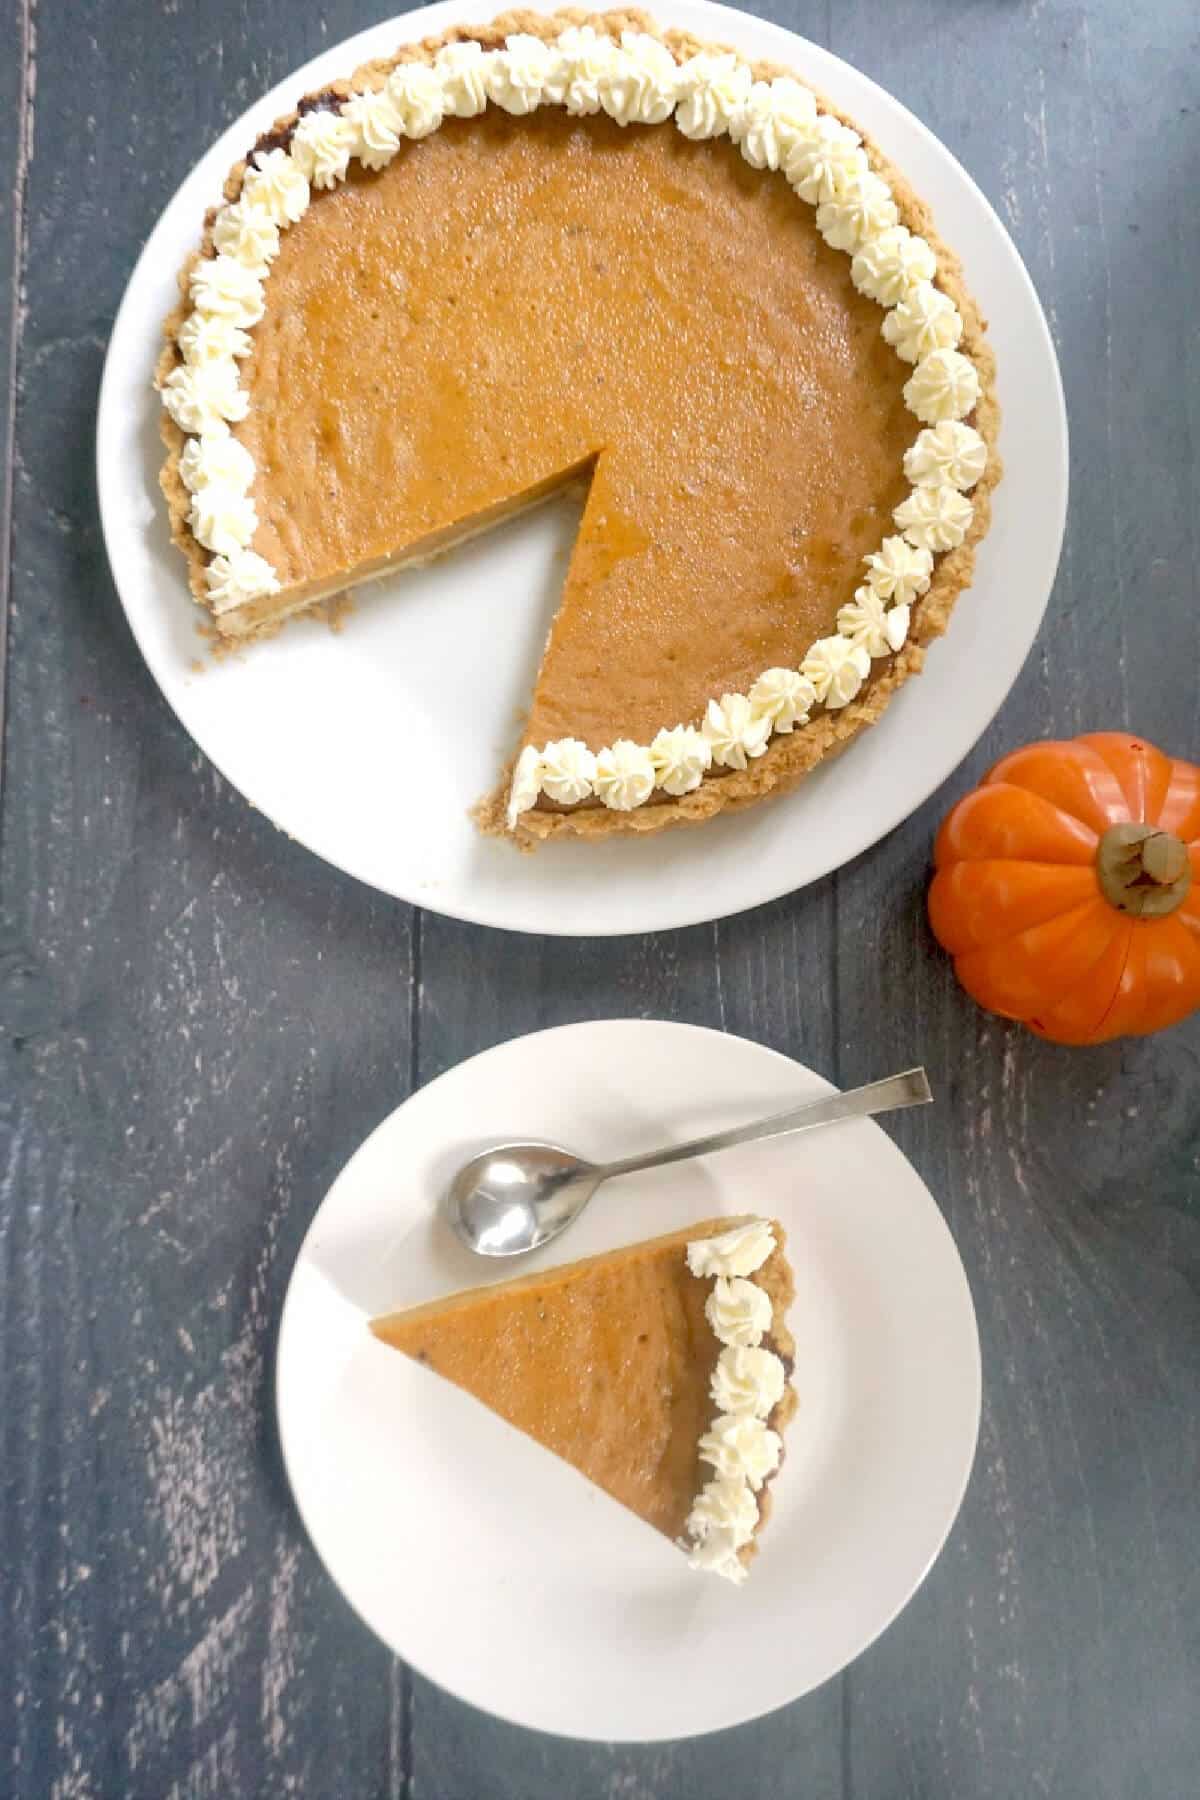 Overhead shoot of a white plate with a slice of pumpkin pie and another plate with the rest of the pie